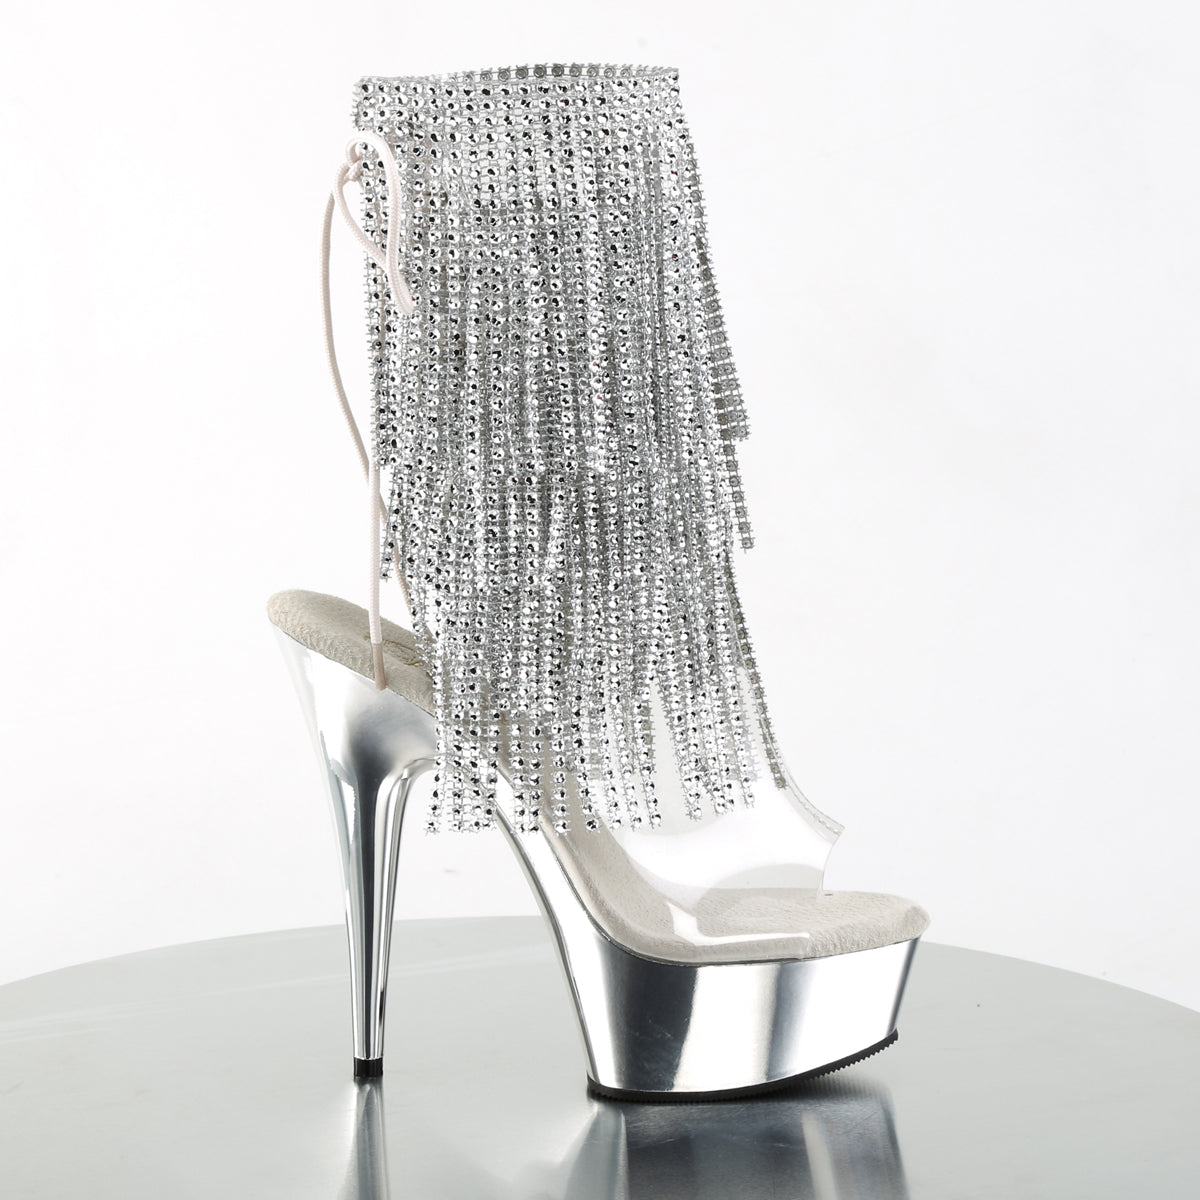 DELIGHT-1017RSF 6" Heel Clear Silver Chrome Strippers Shoes-Pleaser- Sexy Shoes Fetish Heels